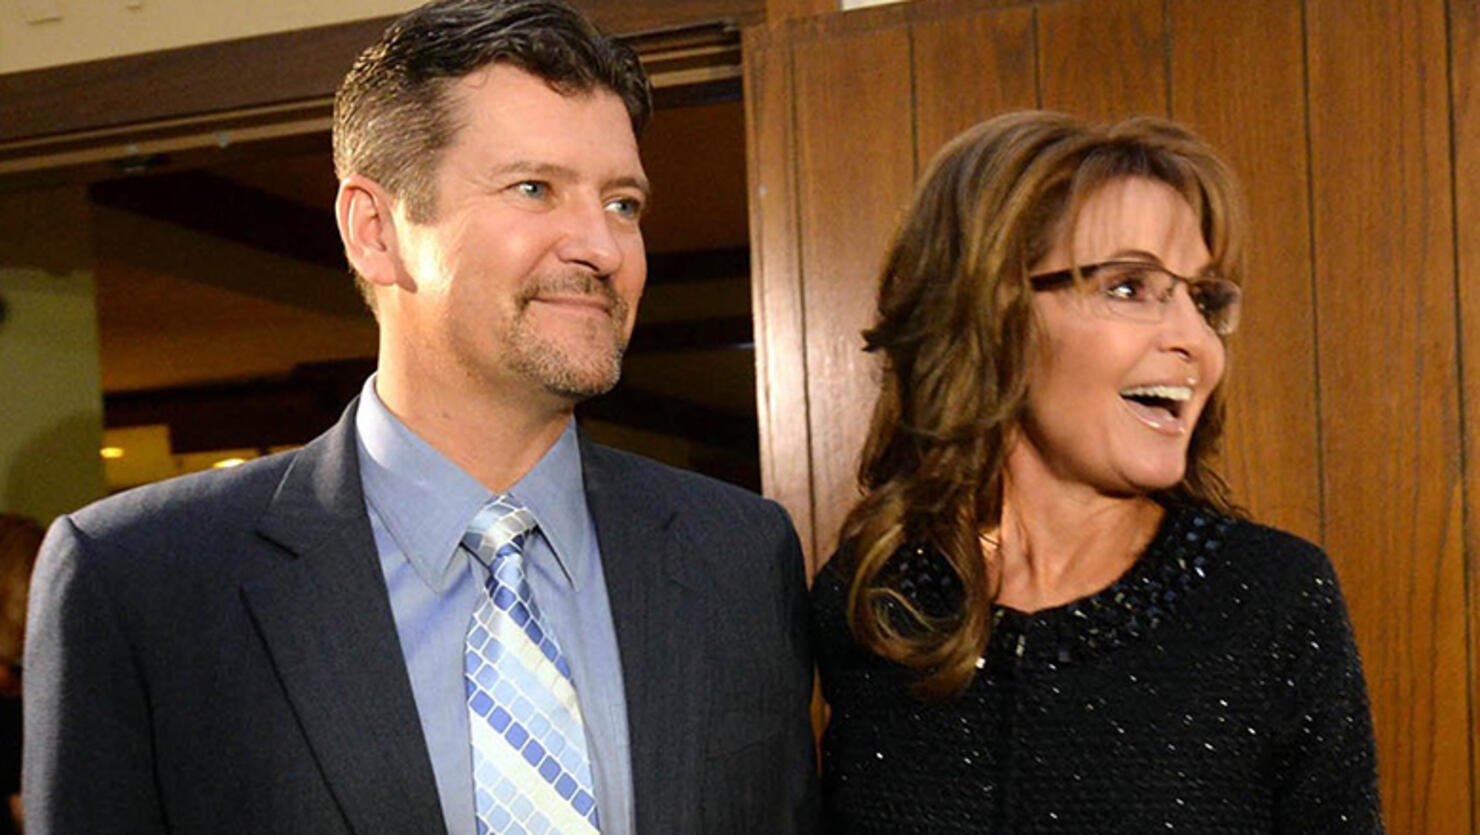 Sarah Palin, right, former Governor of Alaska, and her husband, Todd, arrive at the Grove Park Inn for a celebration of Billy Graham's 95th birthday in Asheville, N.C., on Thursday, Nov. 7, 2013. (Todd Sumlin/Charlotte Observer/Tribune News Service via Getty Images)